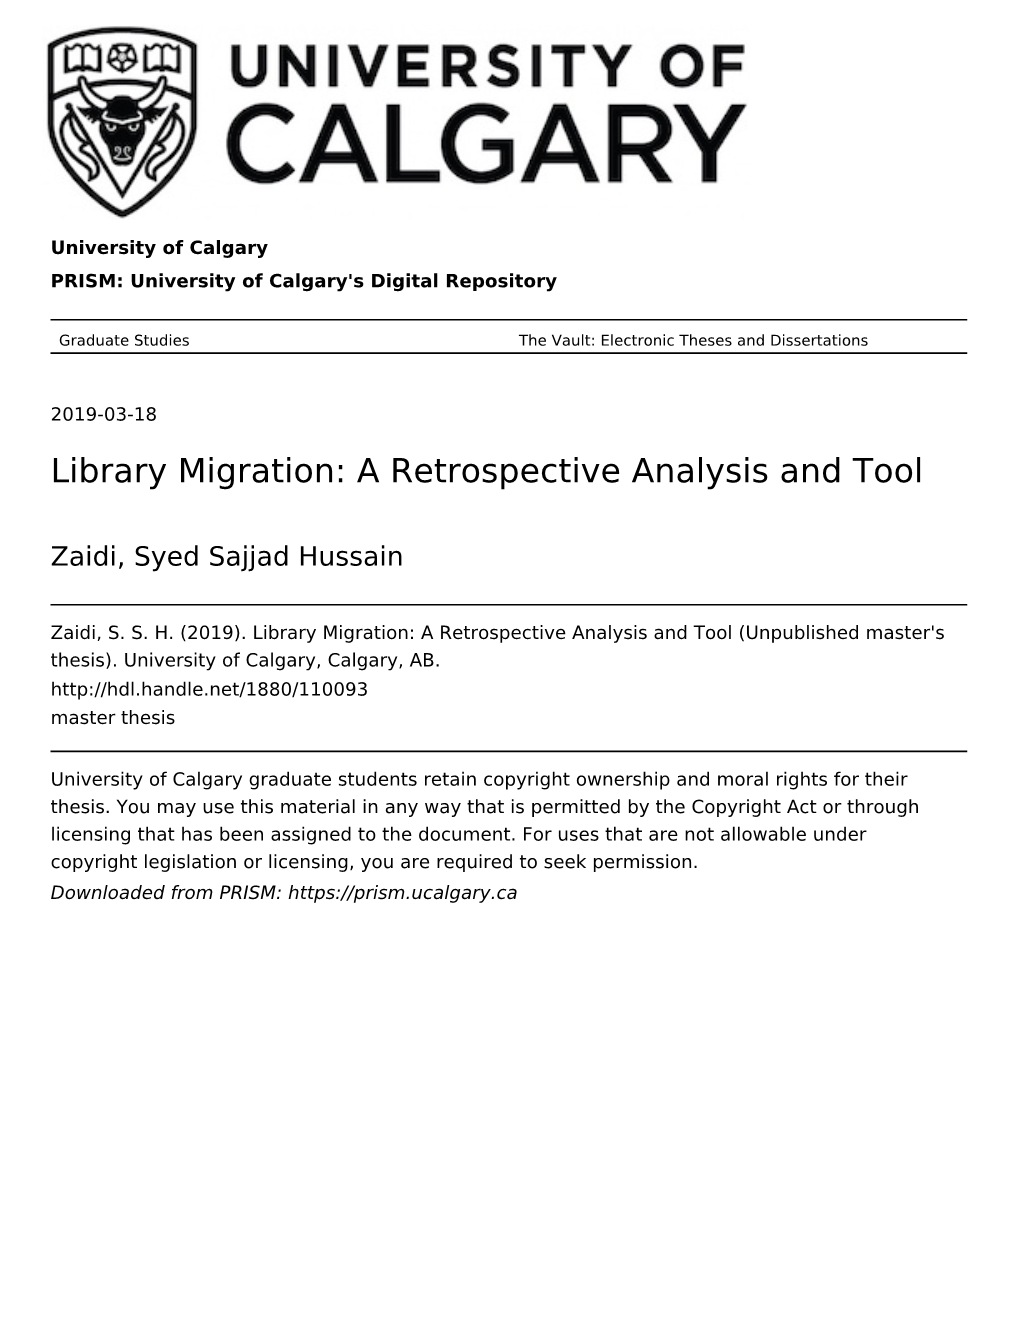 Library Migration: a Retrospective Analysis and Tool